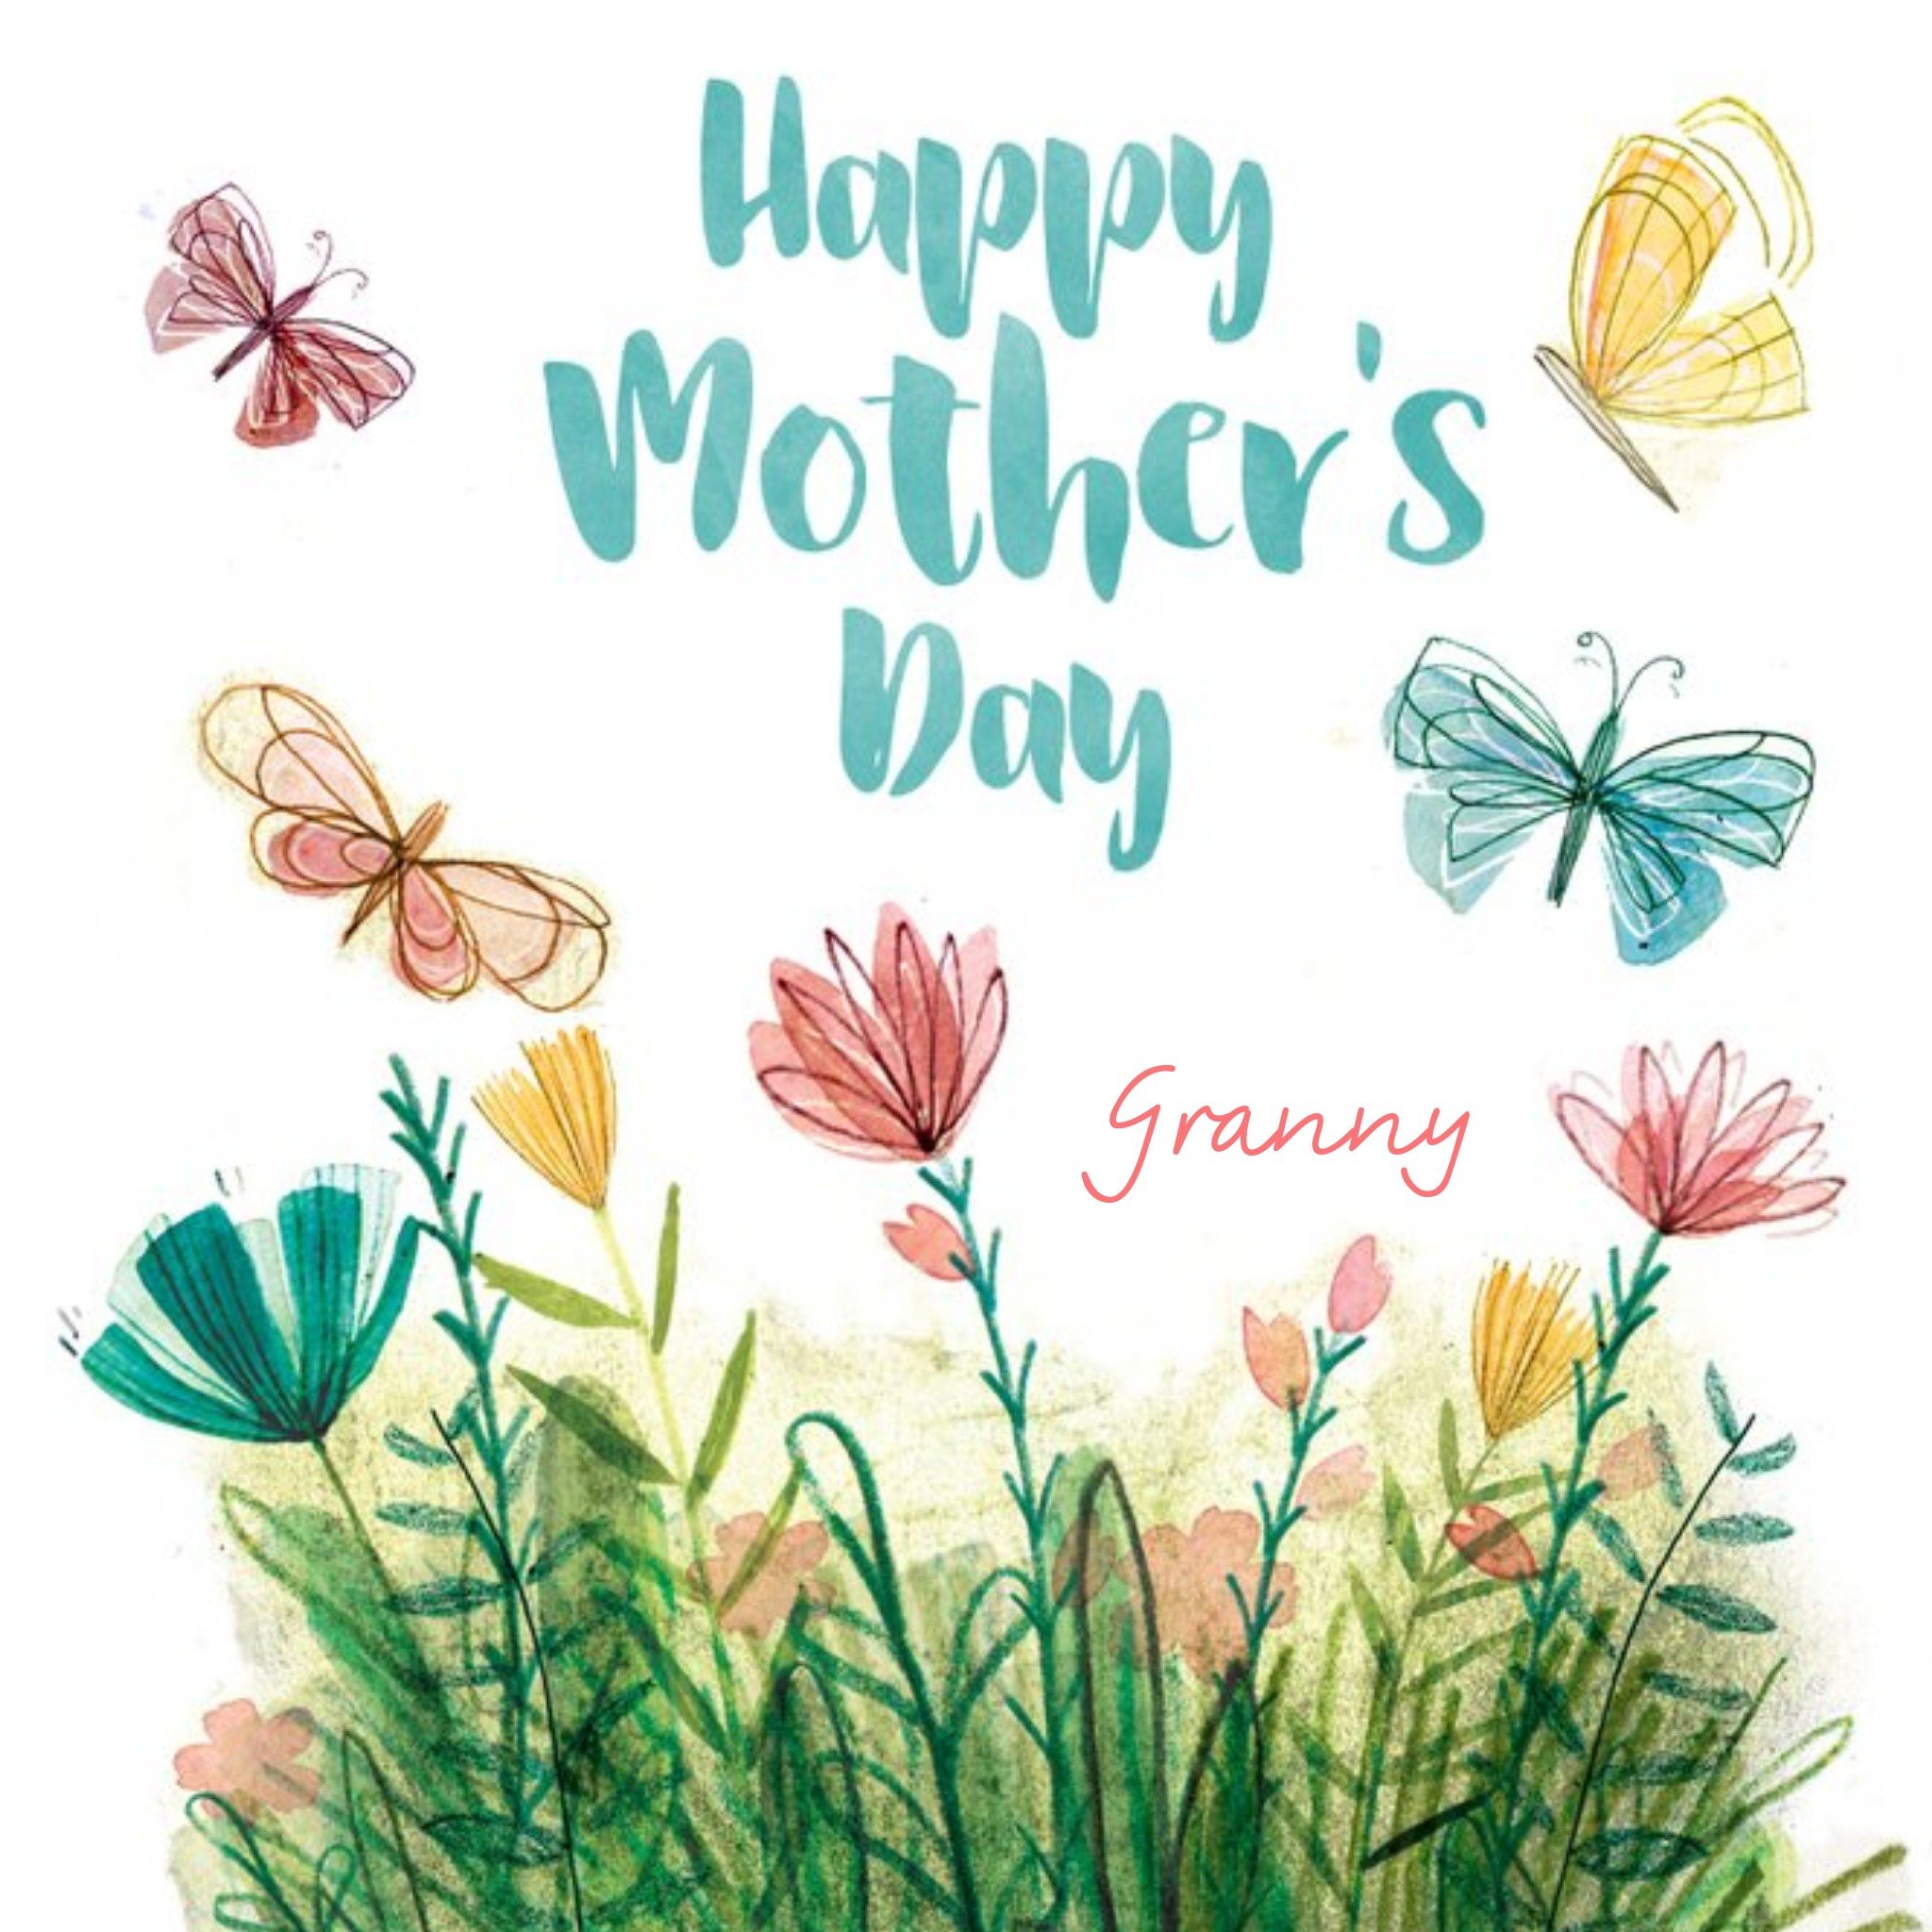 Moonpig Mother's Day Card - Granny - Floral, Square